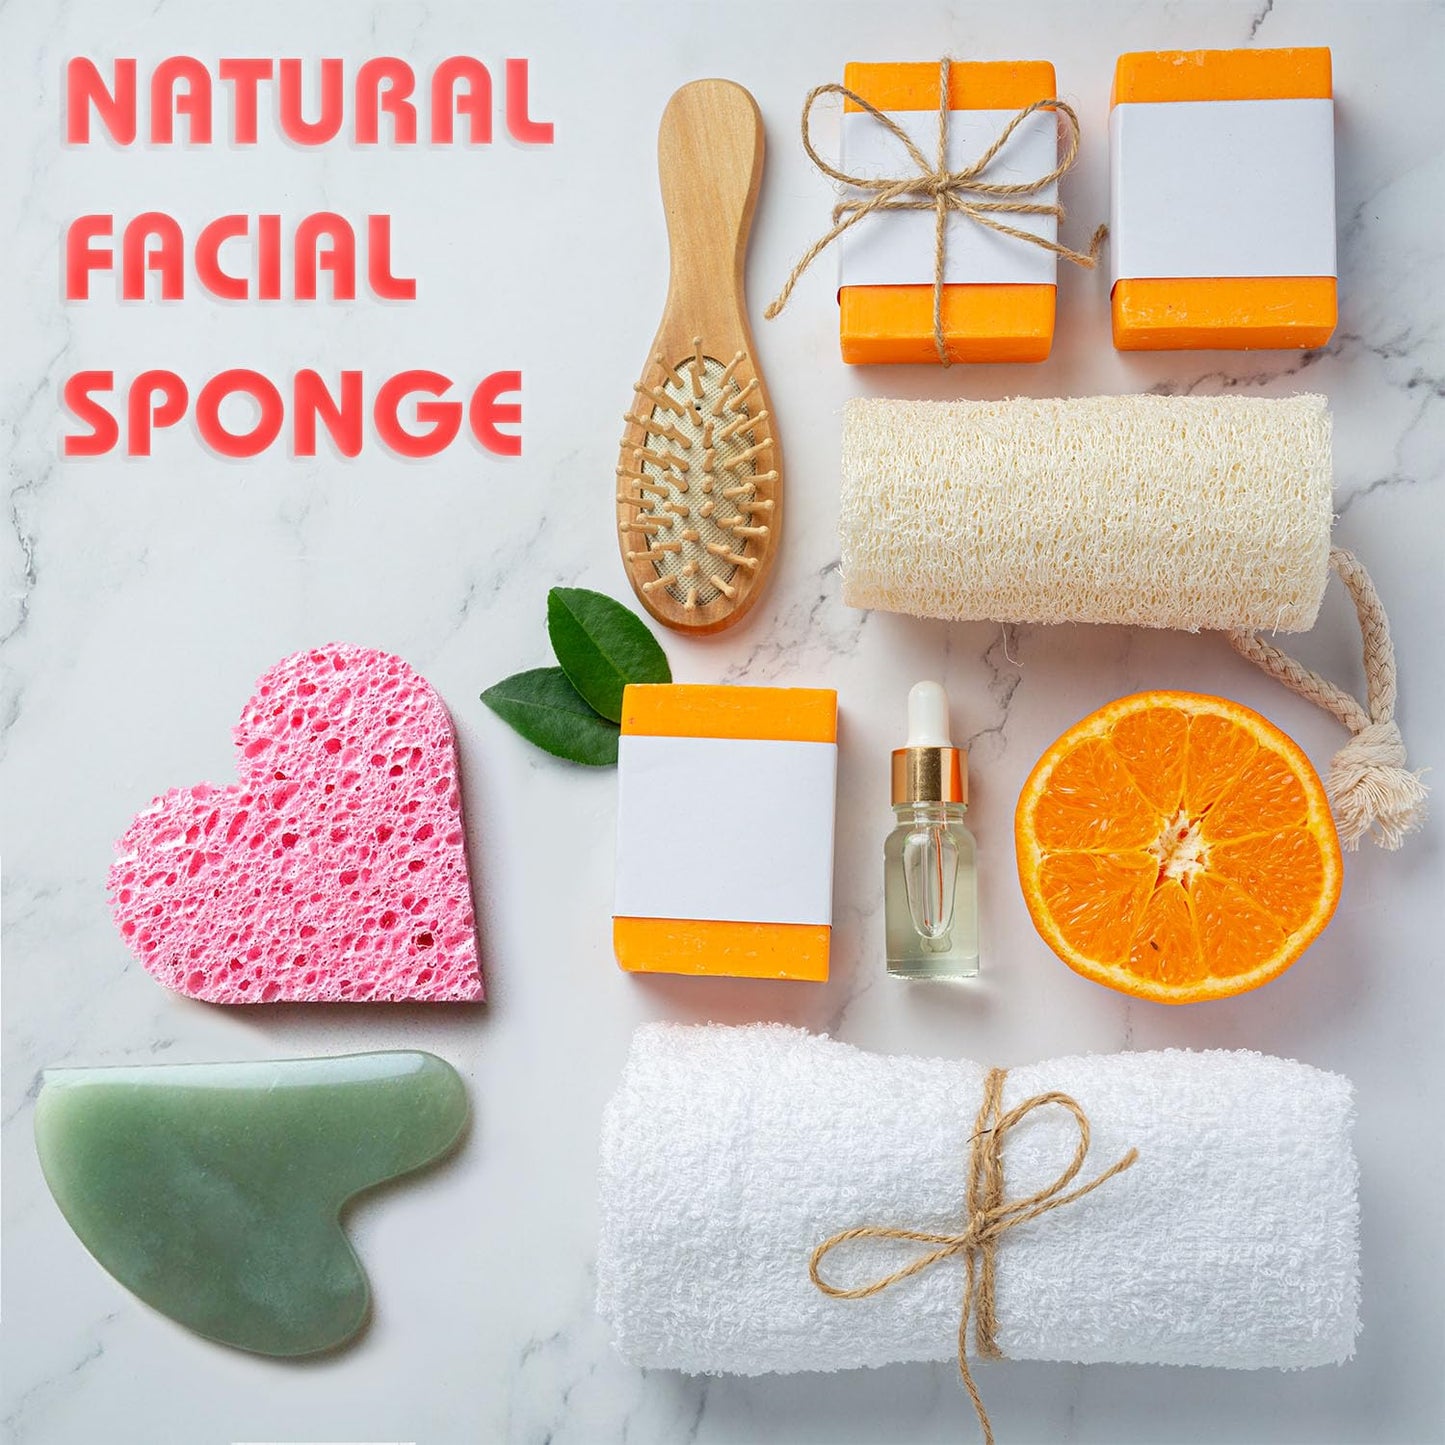 60-Count Compressed Facial Sponges | 100% Natural Cosmetic Spa Sponges for Facial Cleansing | Exfoliating Mask | Makeup Remover | Face Scrubber (Heart)